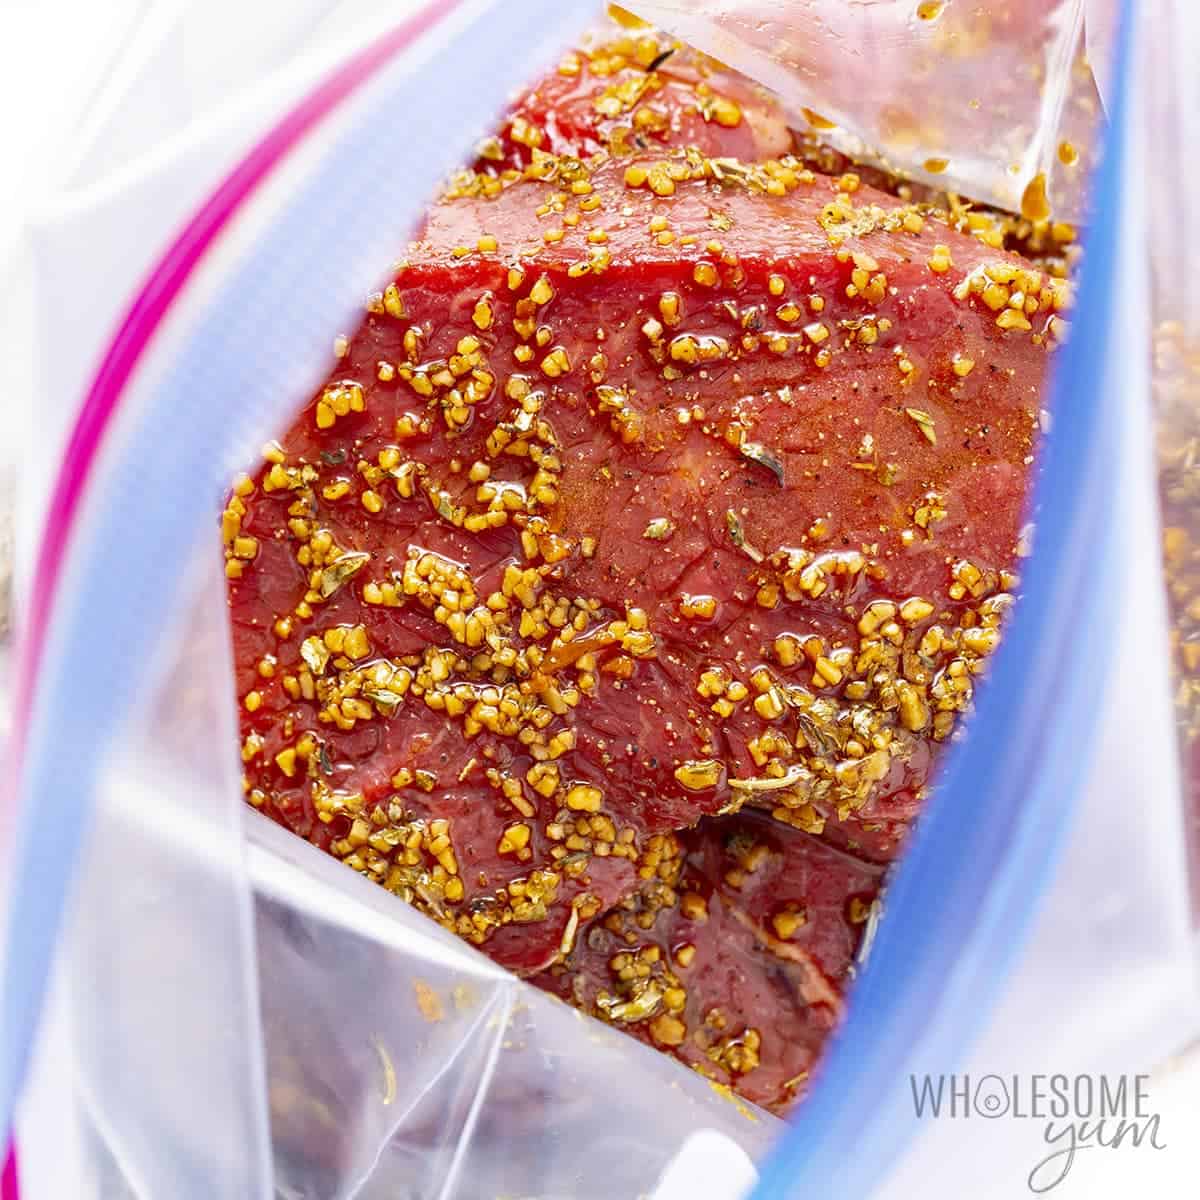 Marinade poured into bag with steaks.